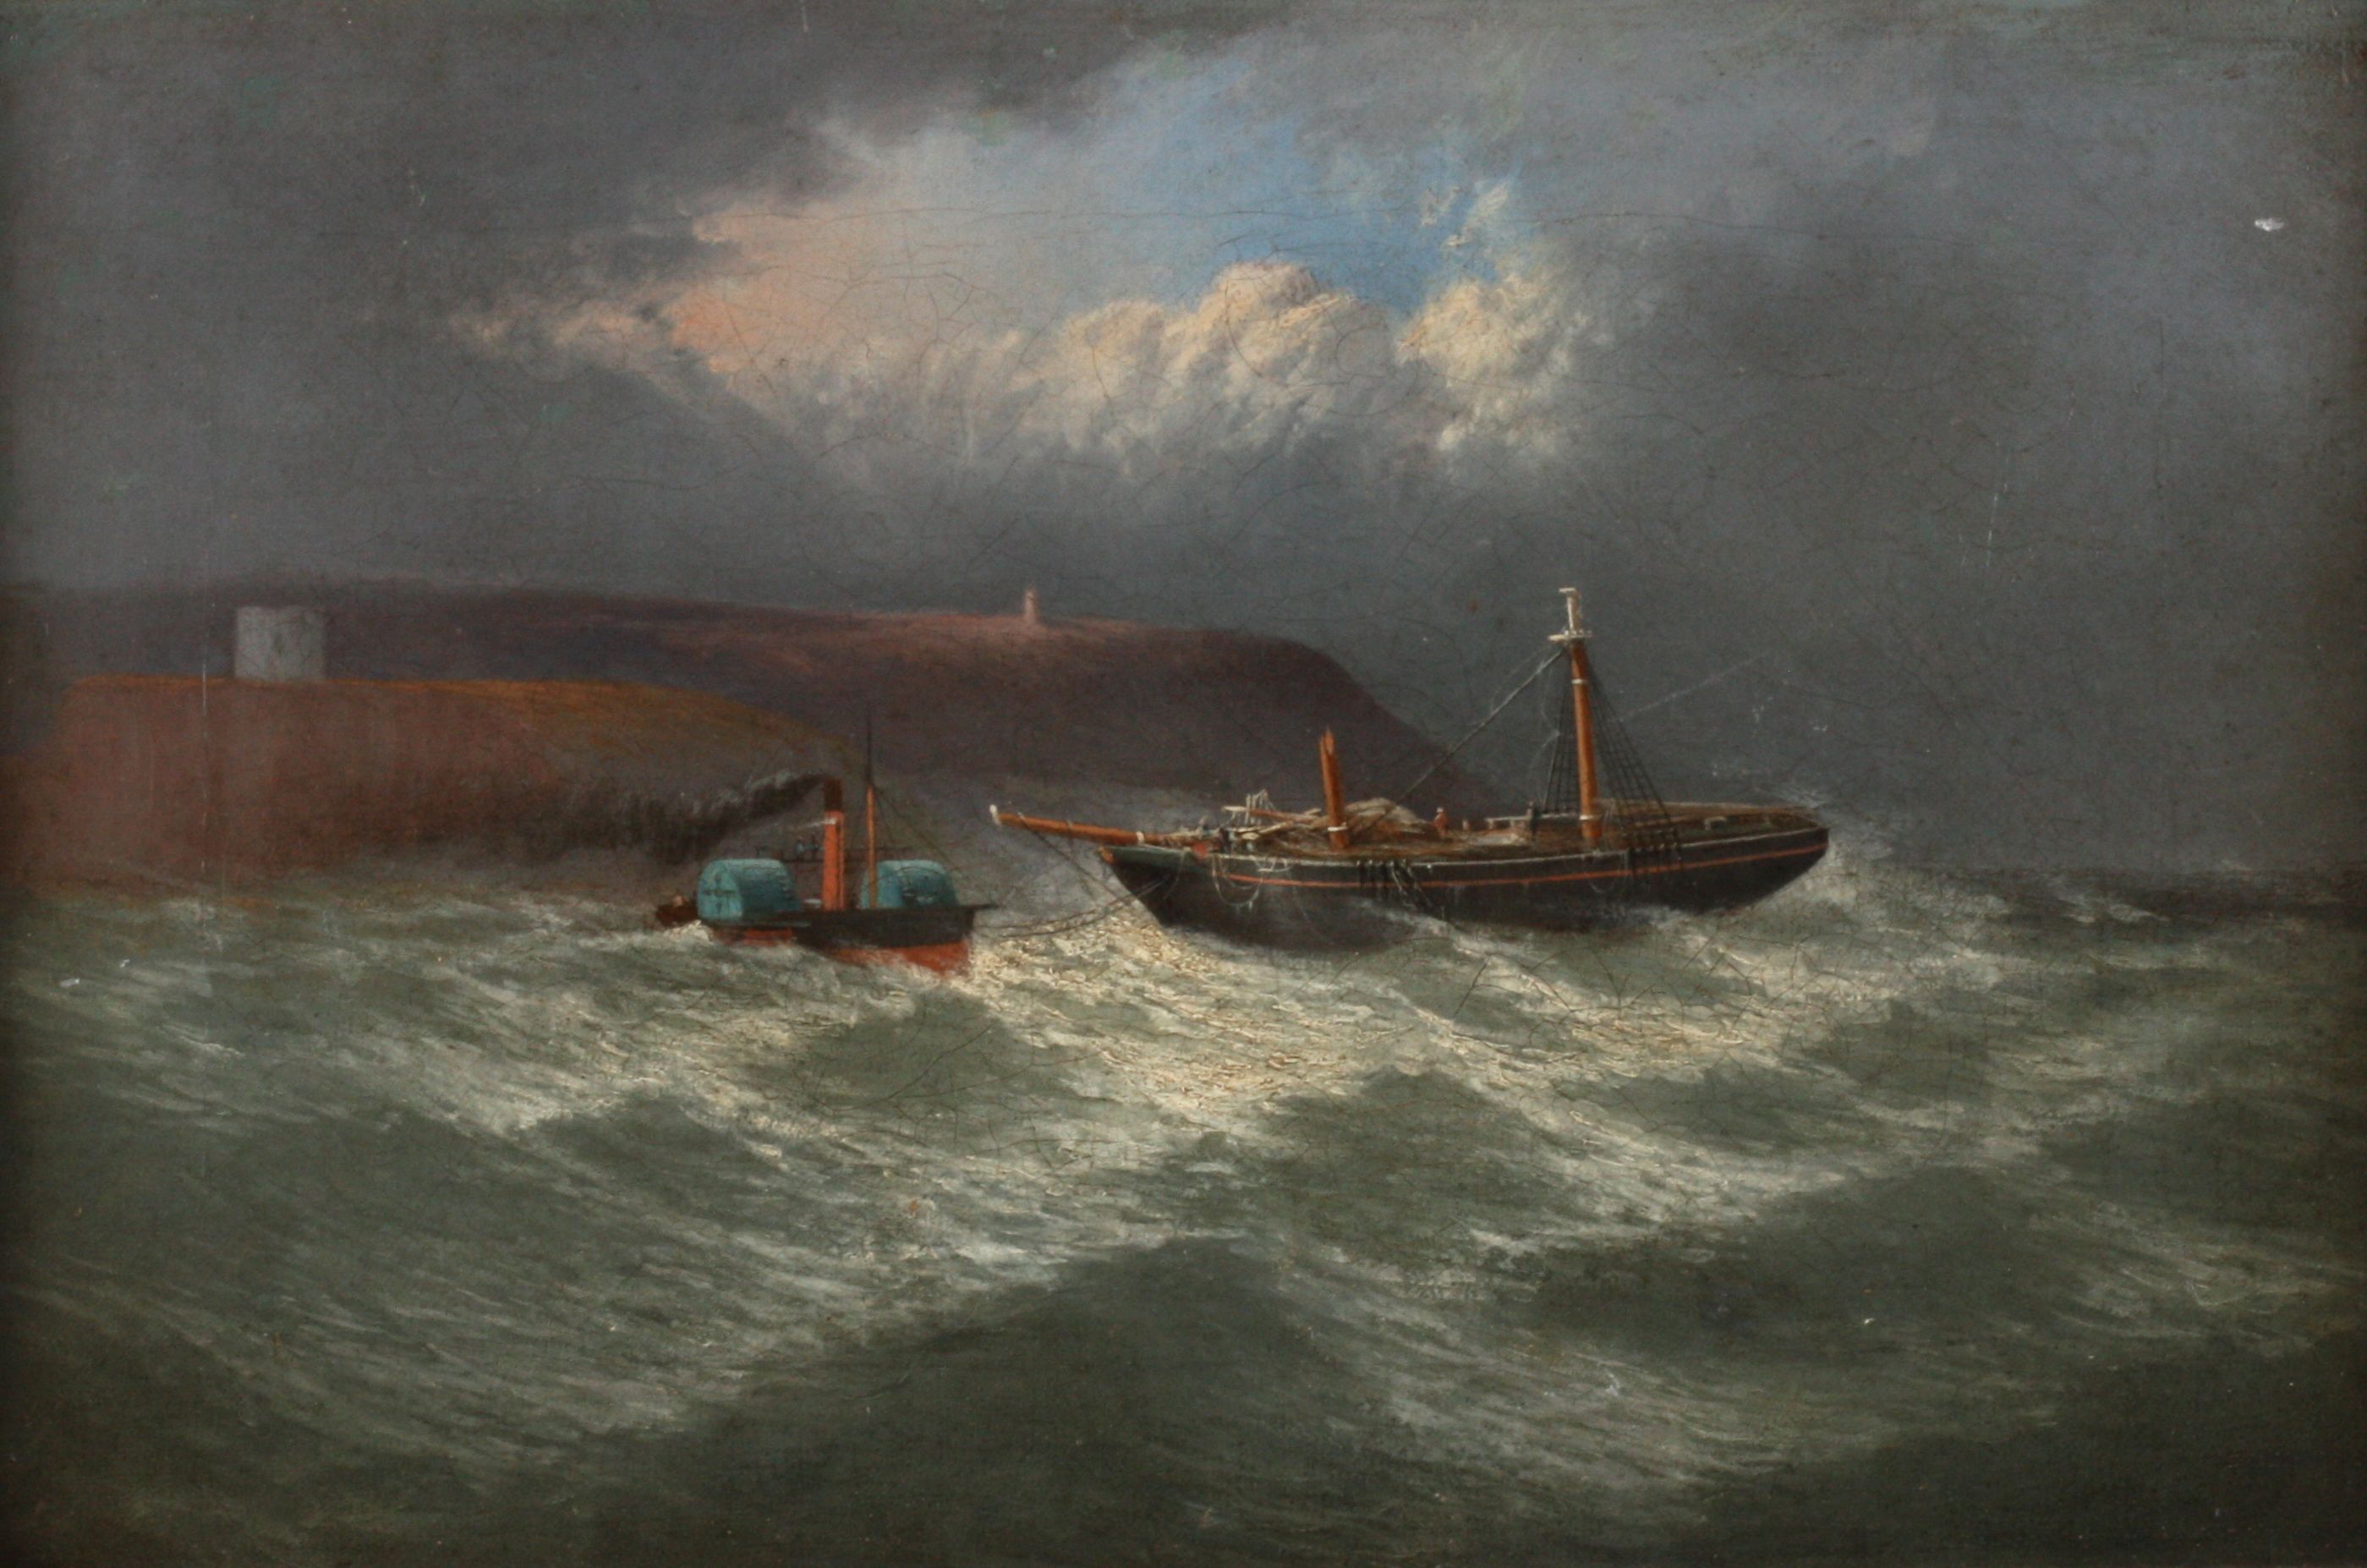 Attributed to George Henry Jenkins (1843-1919) British
A salvage scene with a sailing boat with